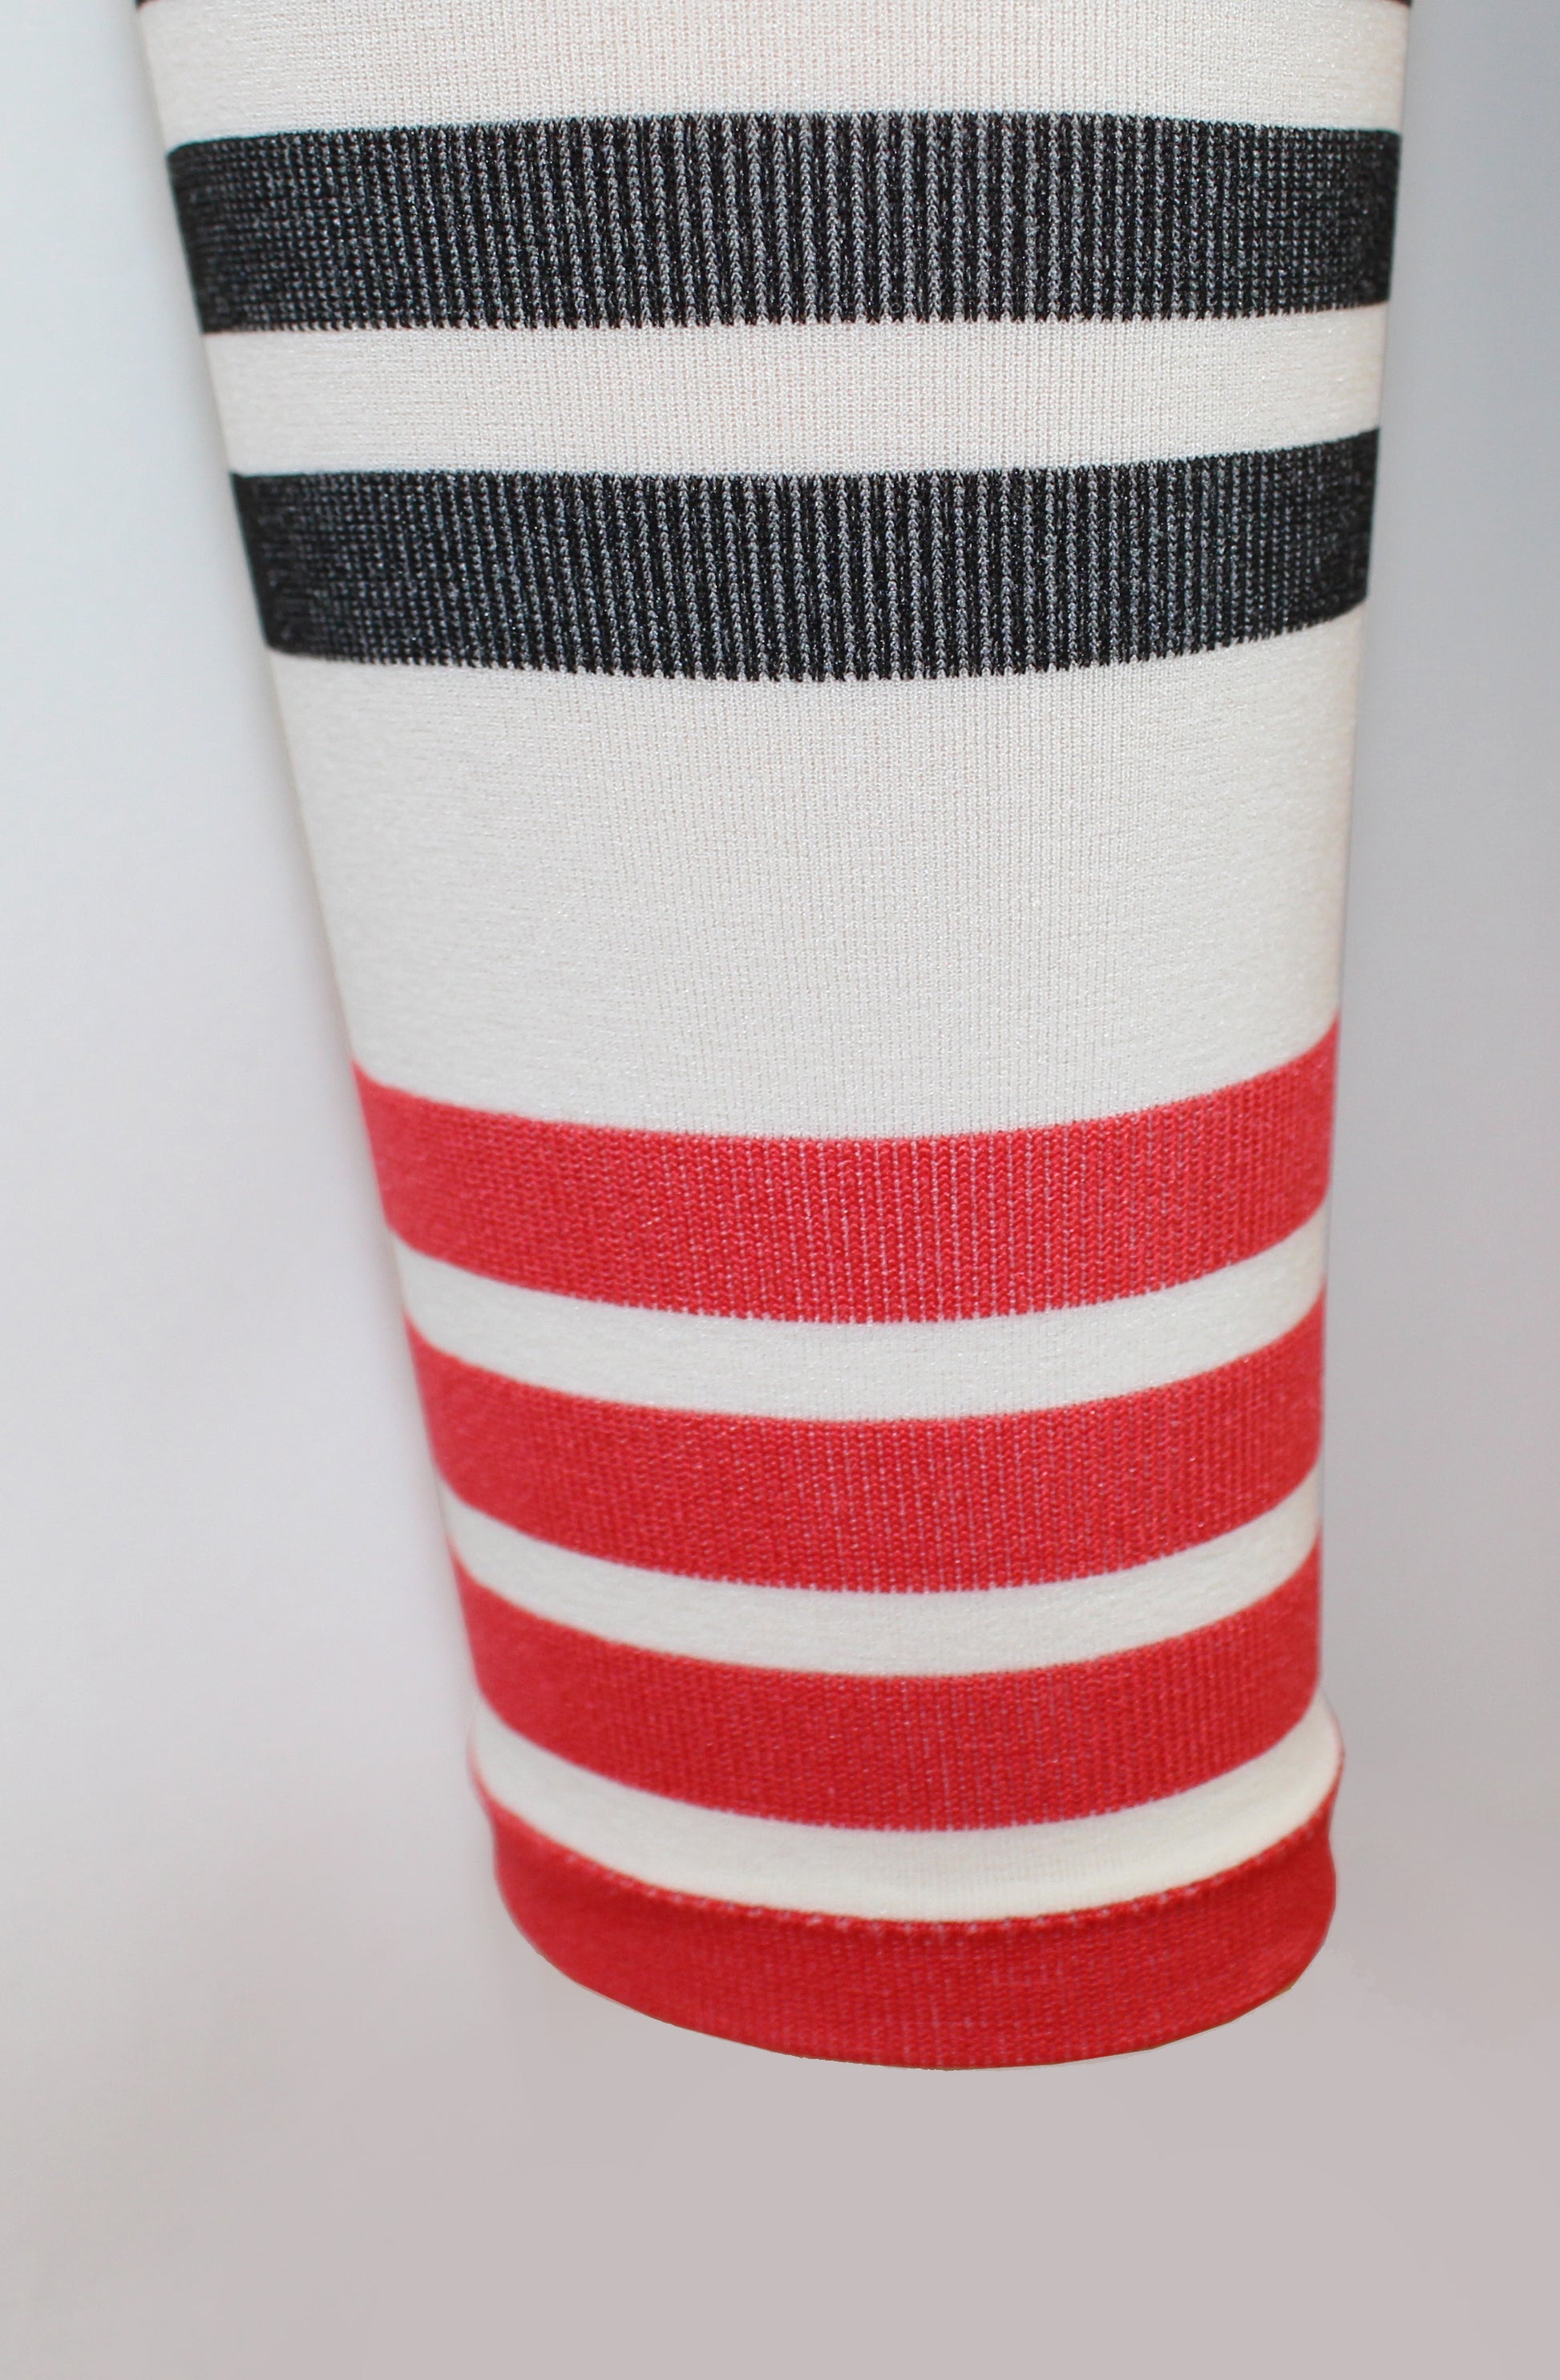 Omsa Popeye Pantacollant - Soft ivory opaque kid's footless tights with a red and black horizontal stripe pattern.